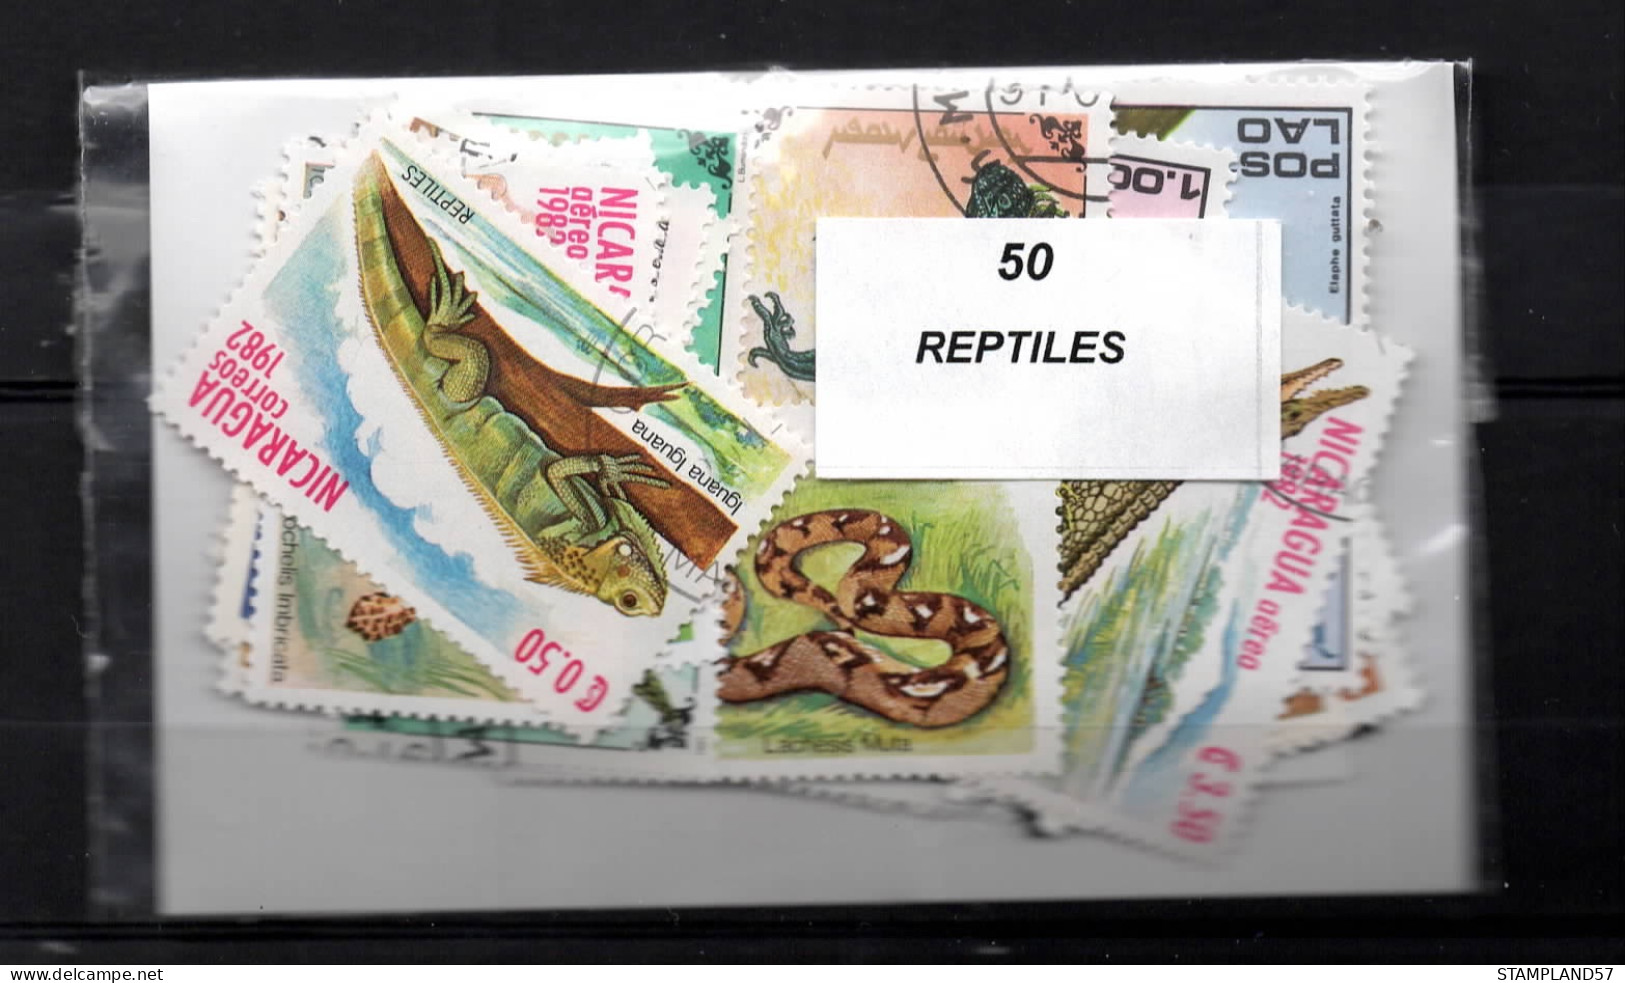 Reptiles - 50 Timbres Différents - Tous Pays - Snakes